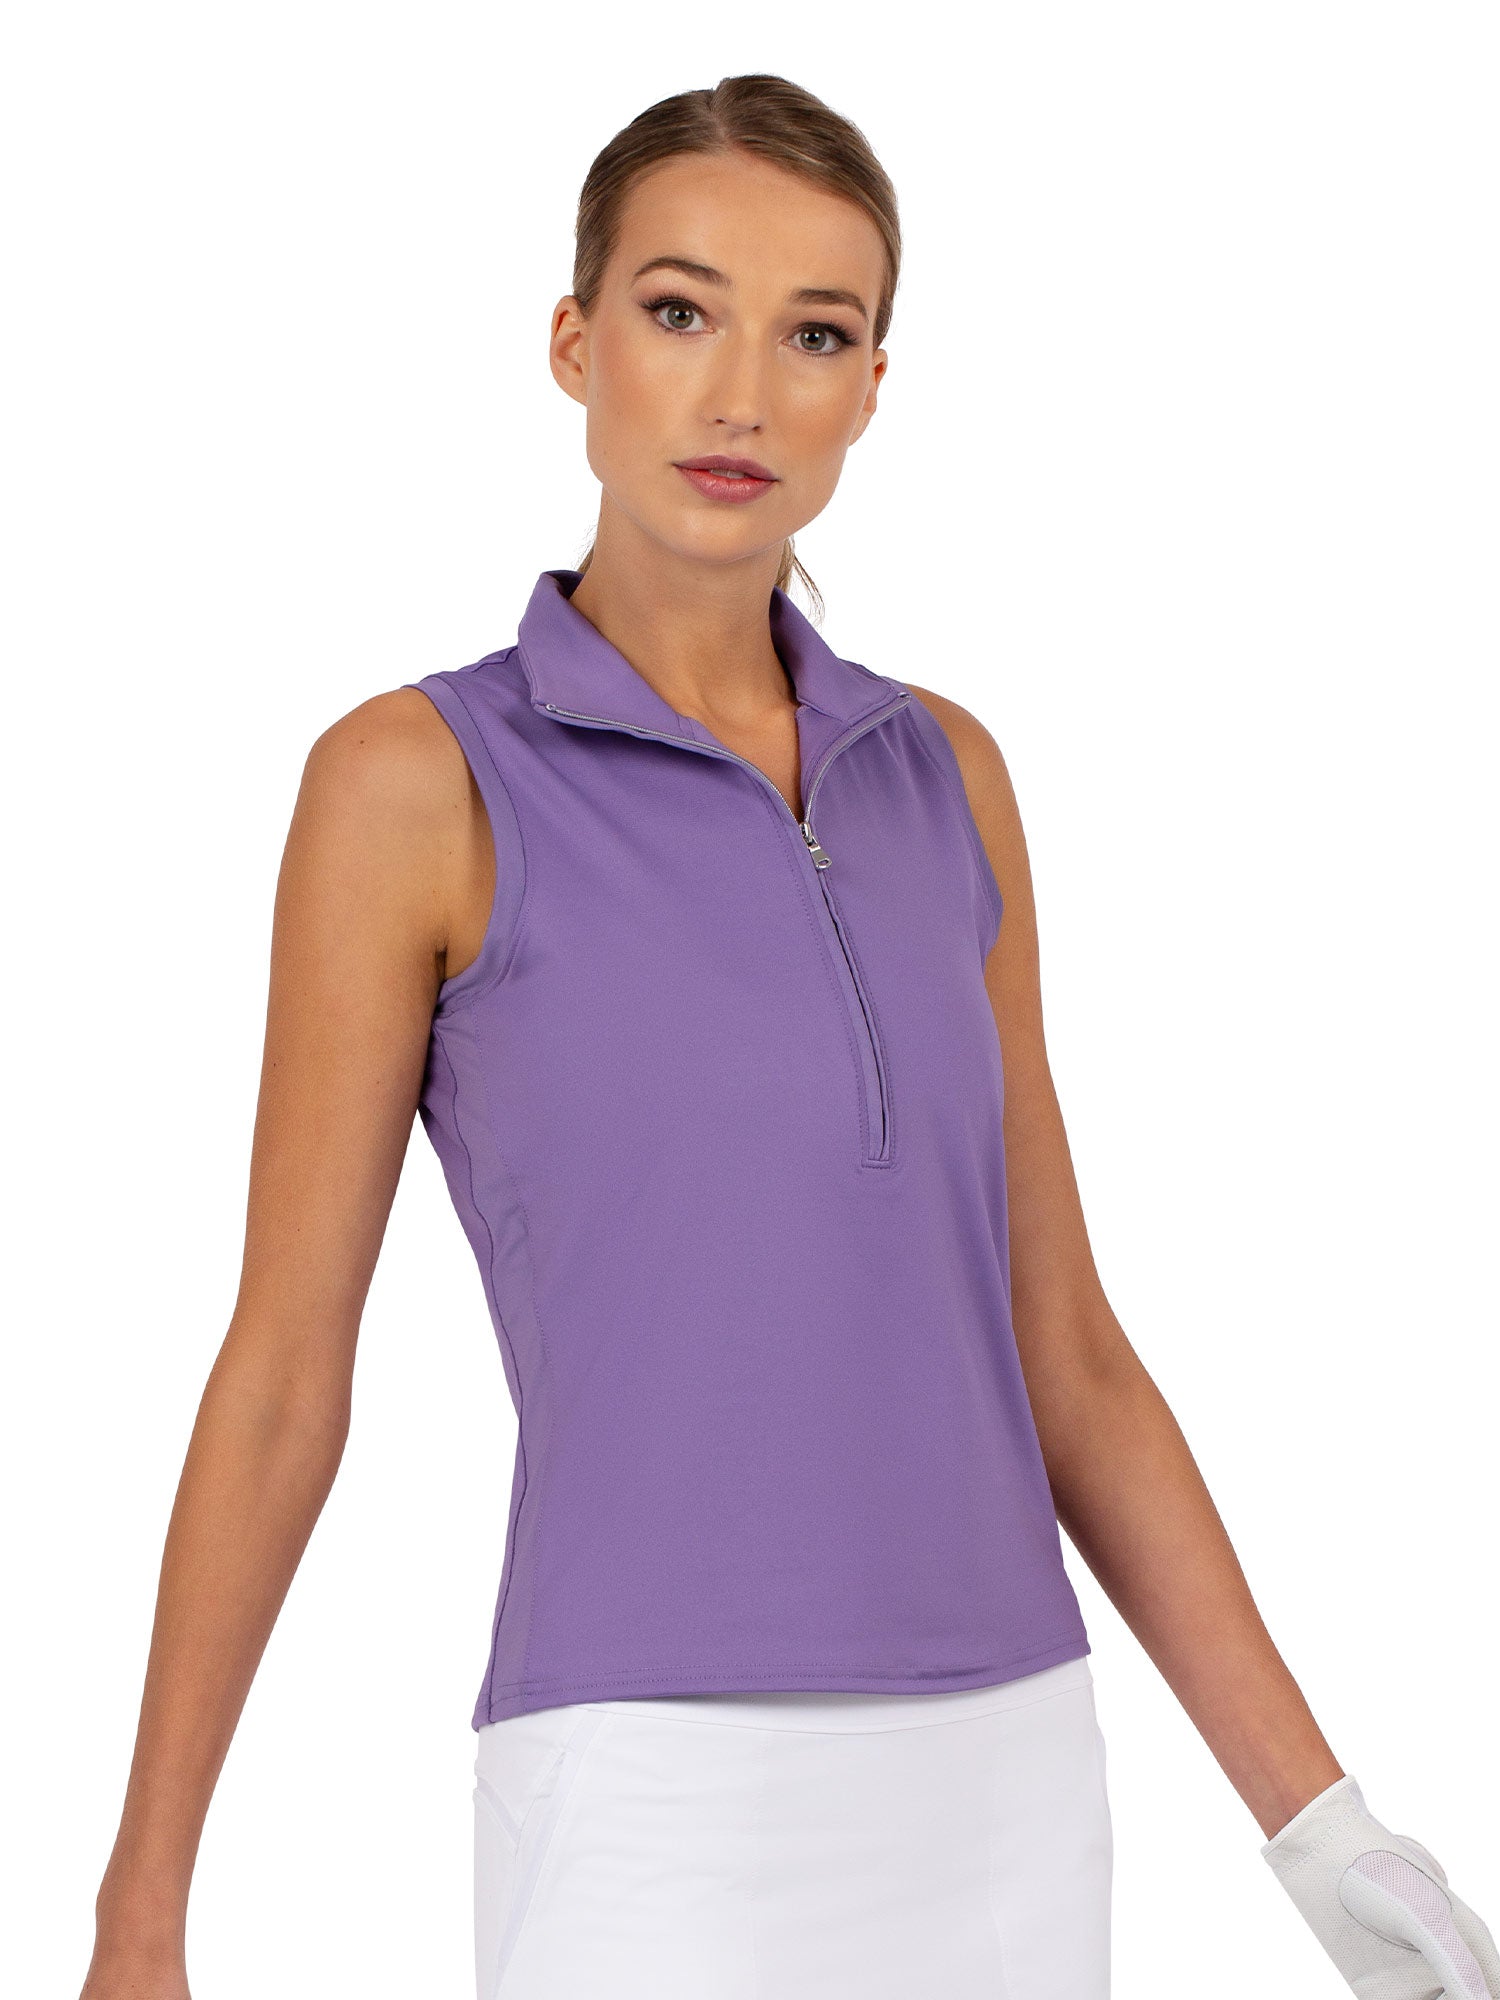 Front view of model wearing the Rhapsody quarter zip sleeveless top in lavender by inPhorm NYC with one hand in her pocket wearing a white glove